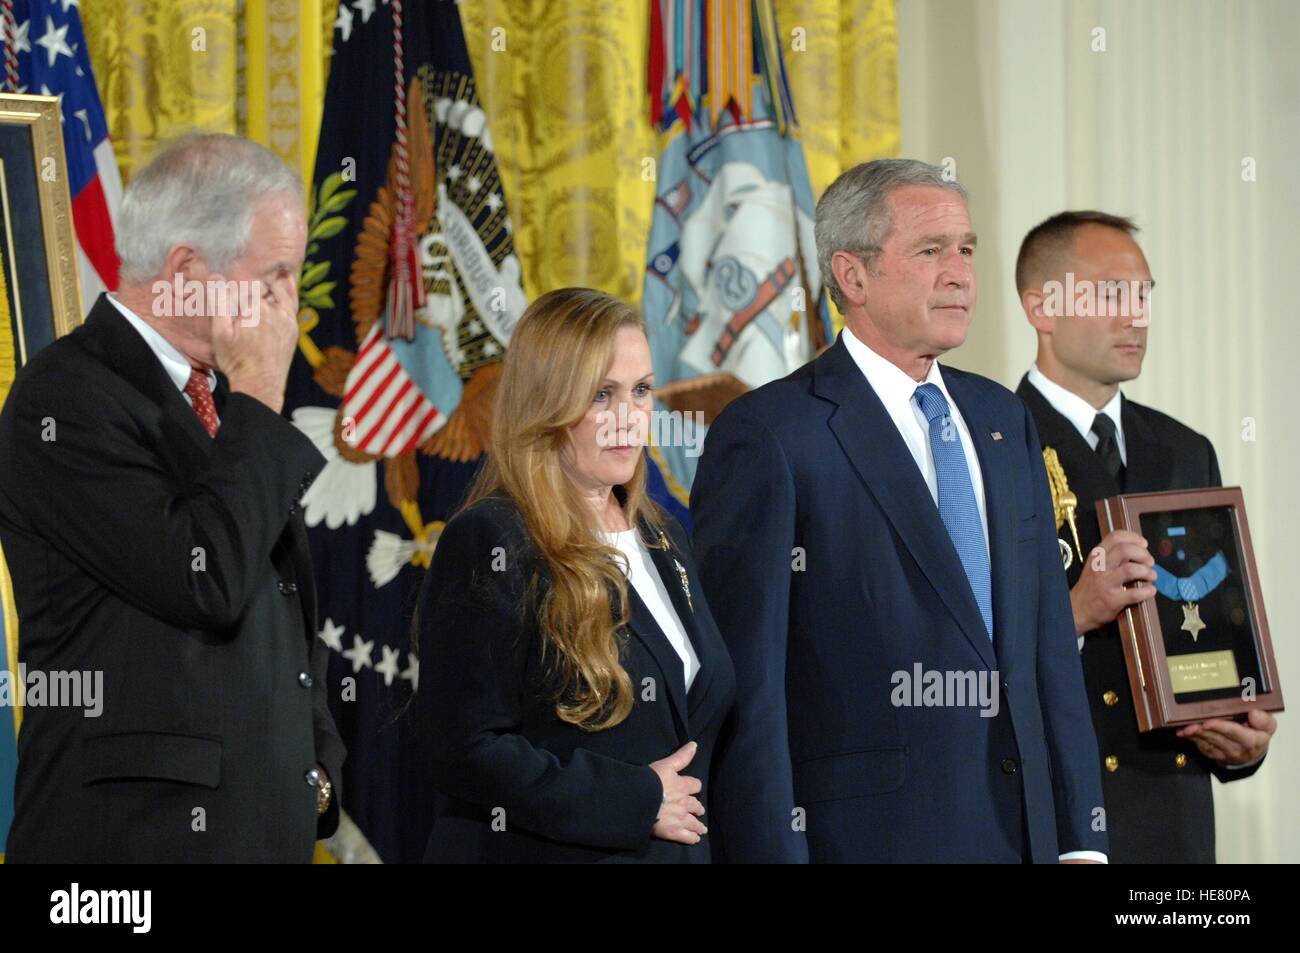 U.S. President George W. Bush presents the Medal of Honor to the parents of Navy SEAL Michael Murphy, Daniel Murphy and Maureen Murphy, during a ceremony at the White House October 22, 2007 in Washington, DC. Murphy was killed by enemy fire while serving near Asadabad, Afghanistan. Stock Photo